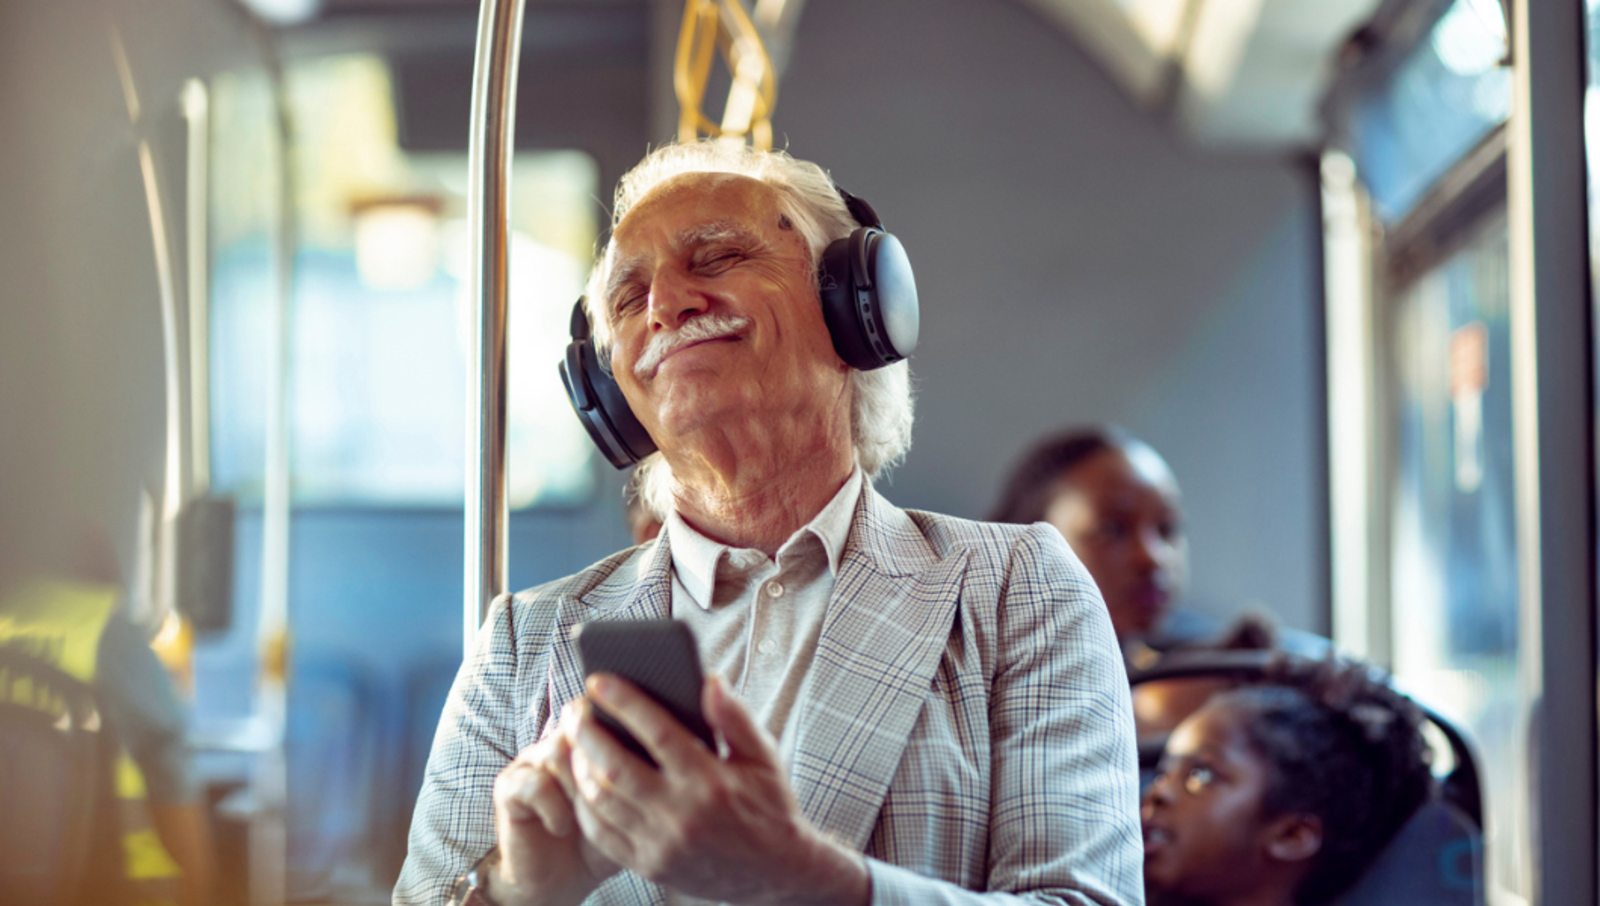 Old man happily listening to music with headphones on on a bus